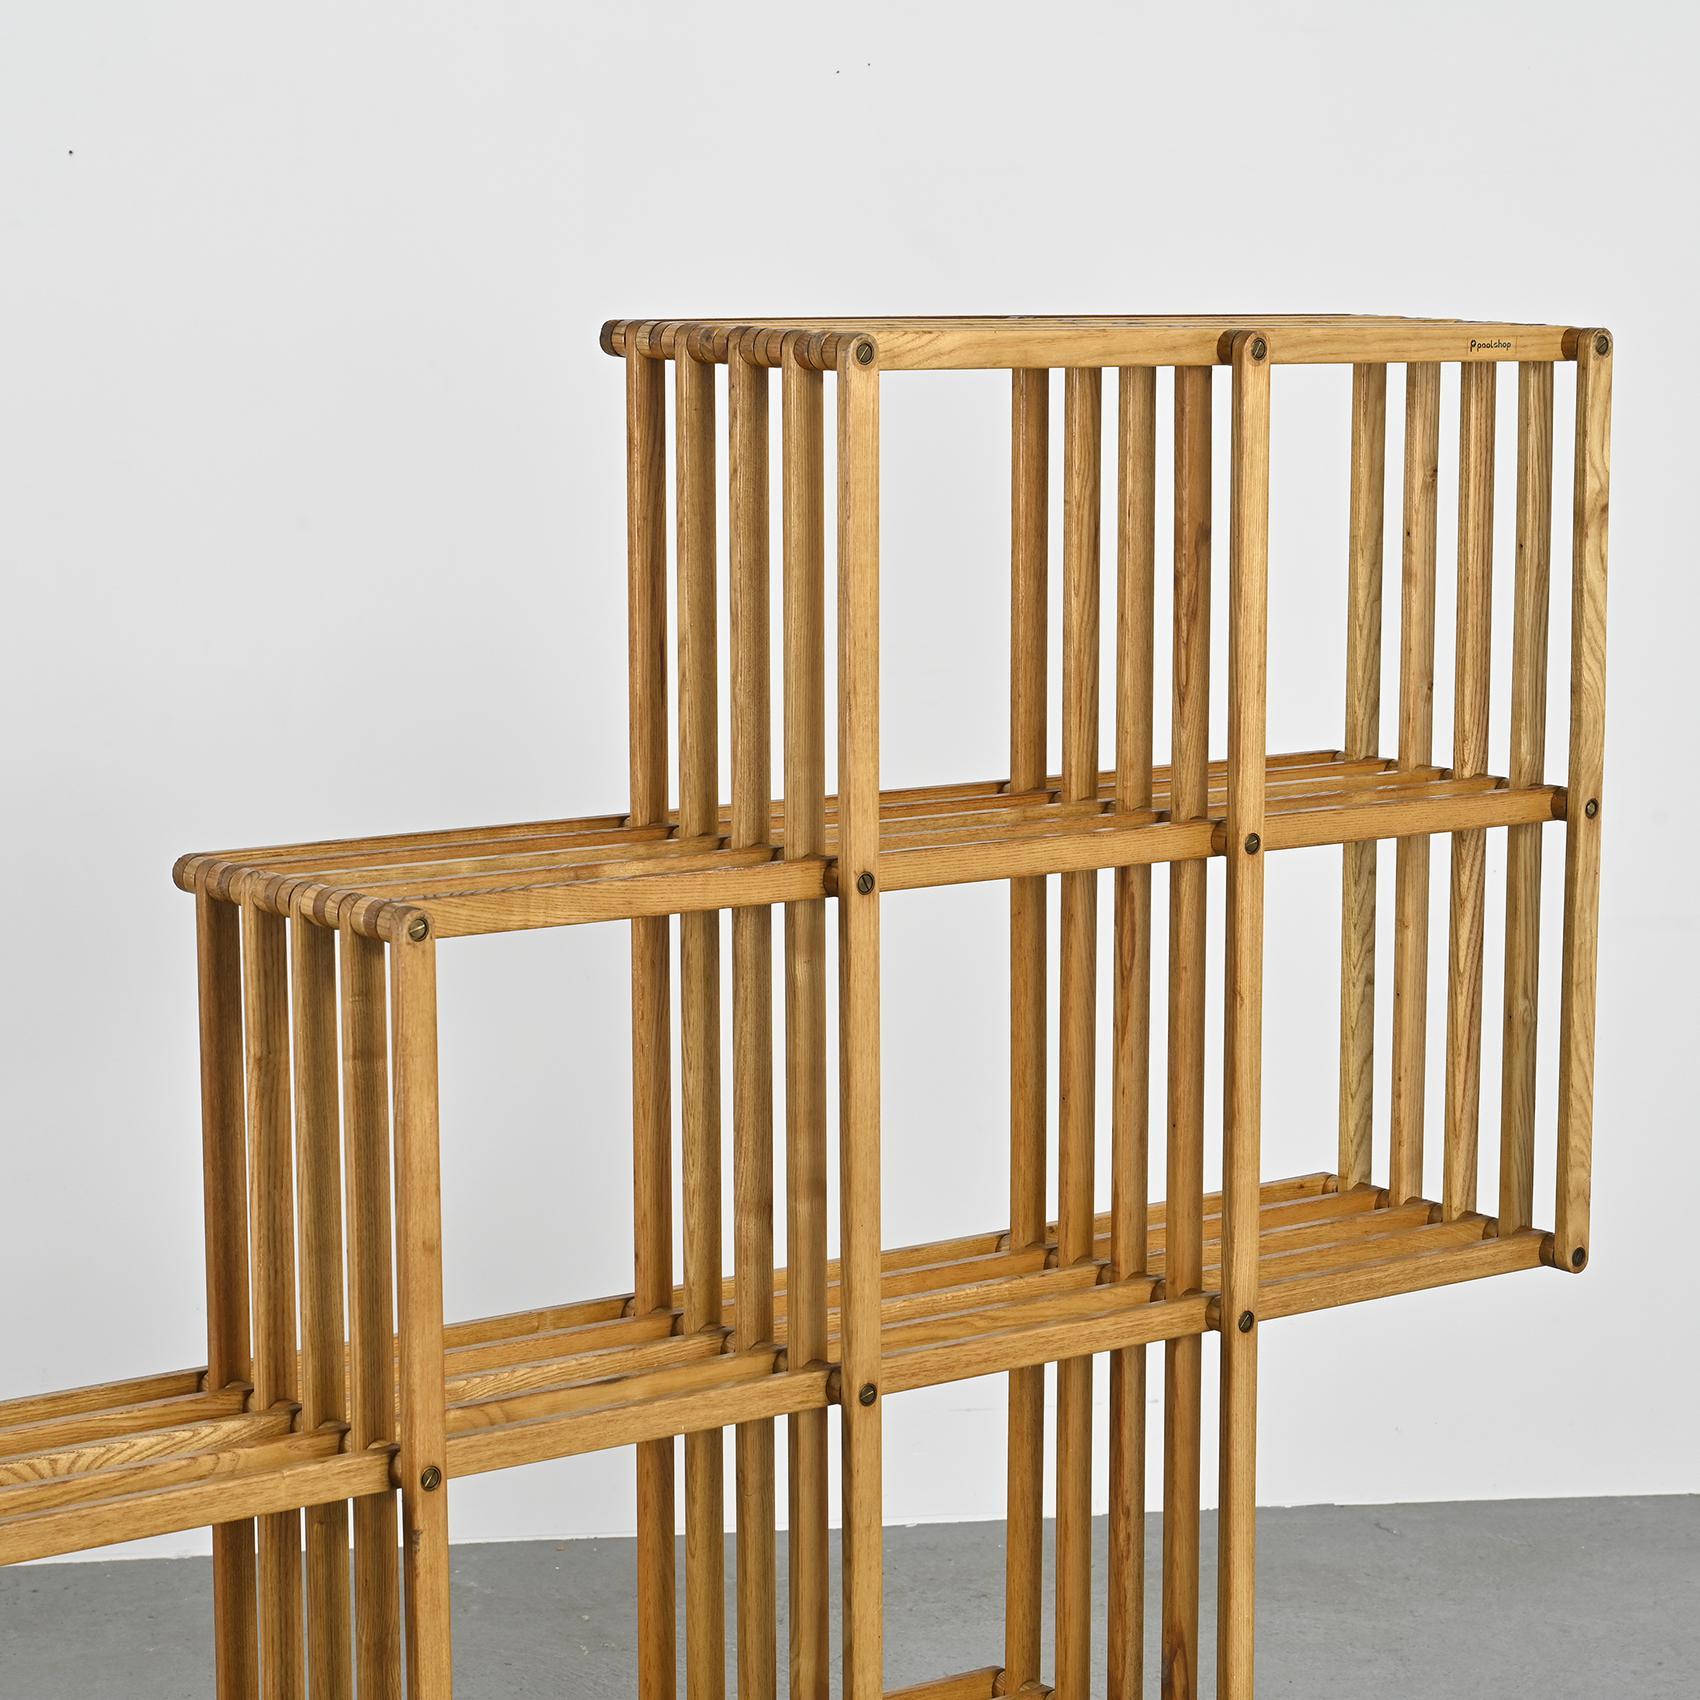 Crafted in the 1980s, this Italian modern wooden folding floor and wall bookcase by Pool Shop stands out with its irregular design. Boasting 11 square compartments and an external shelf, its unique structure is entirely collapsible, facilitated by